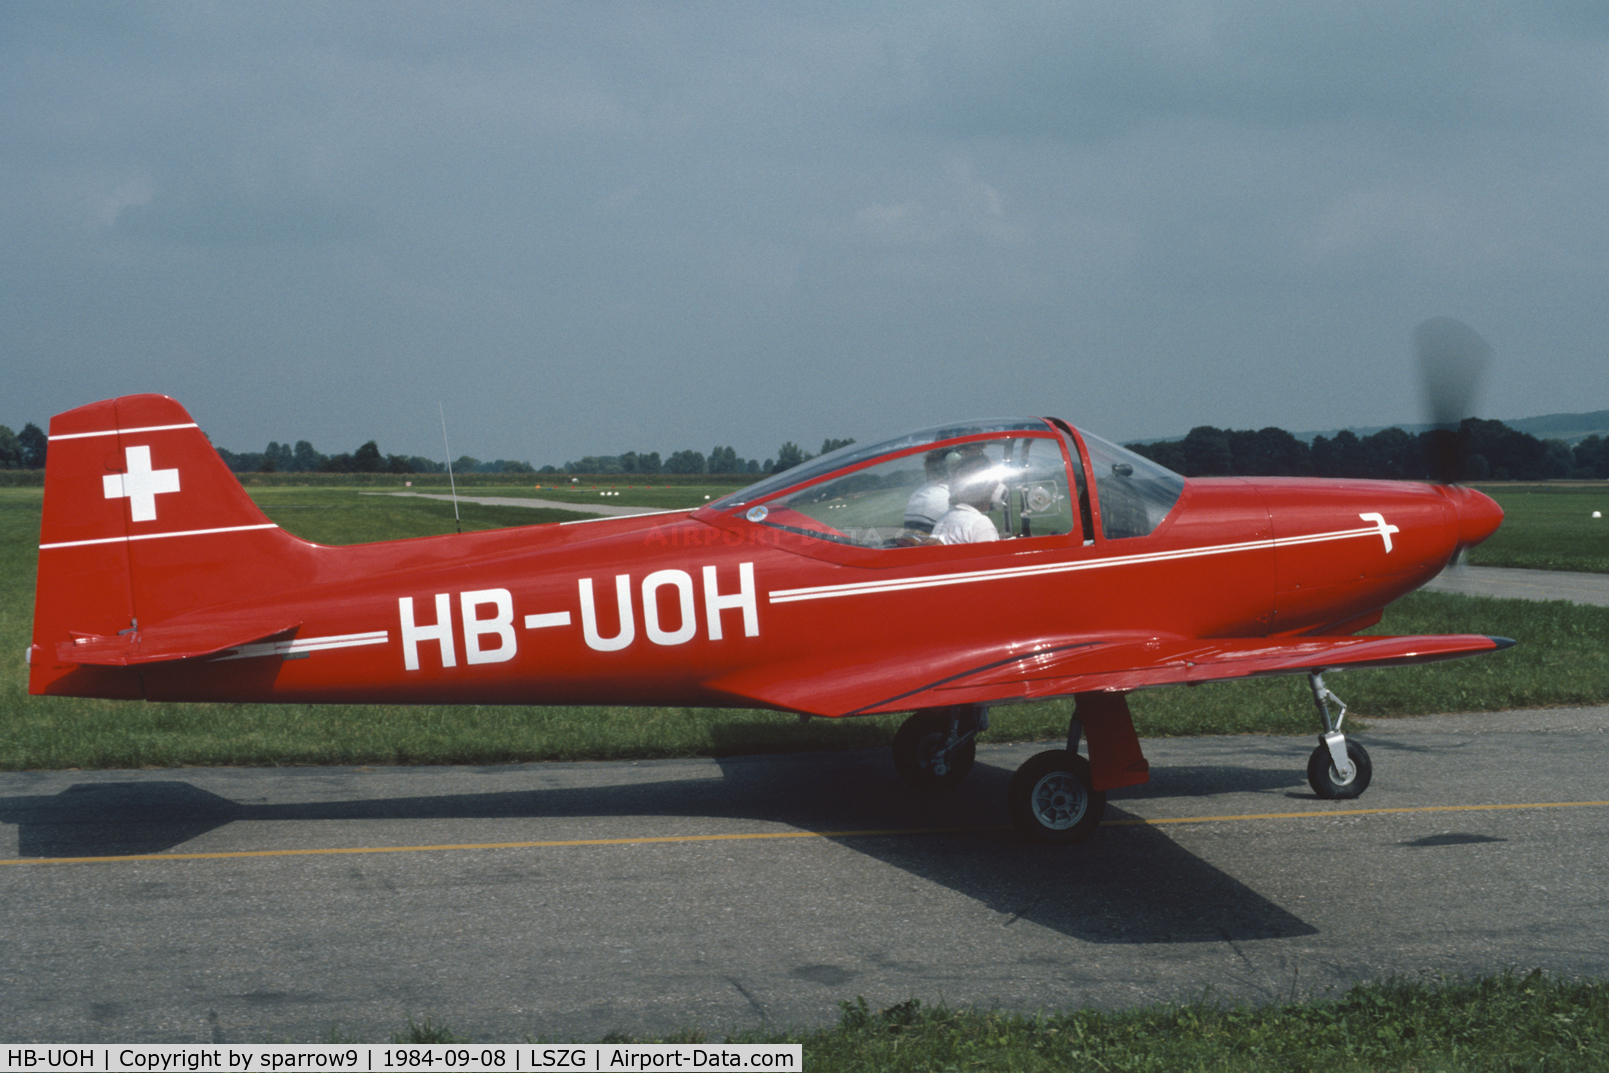 HB-UOH, 1956 Aviamilano F-8L Falco Series 1 C/N 105, At Grenchen airport. Scanned from a slide.